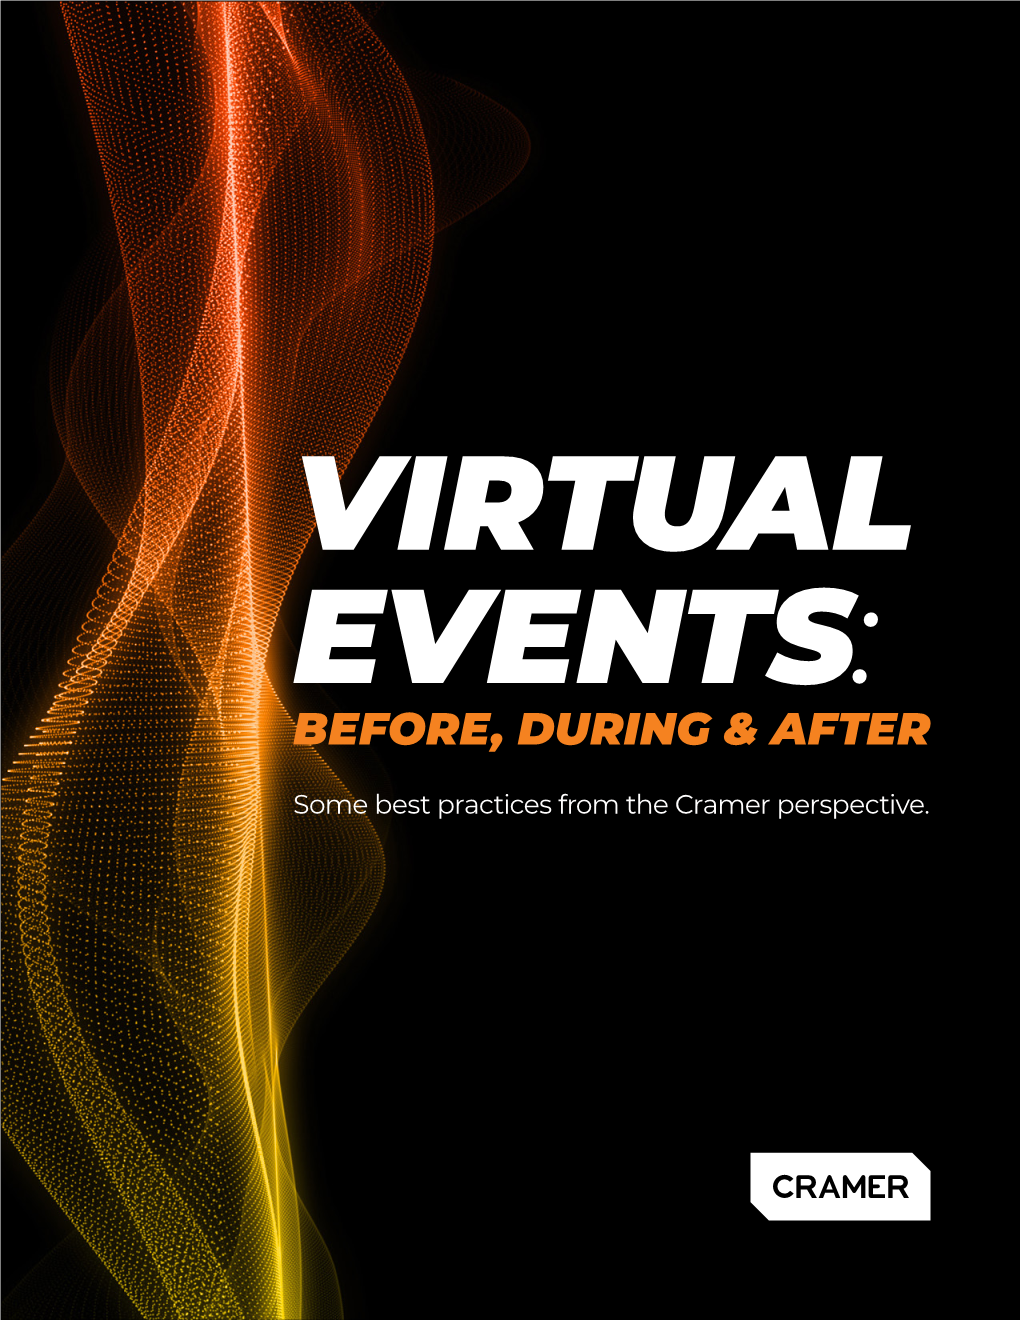 Virtual Events: Before, During & After